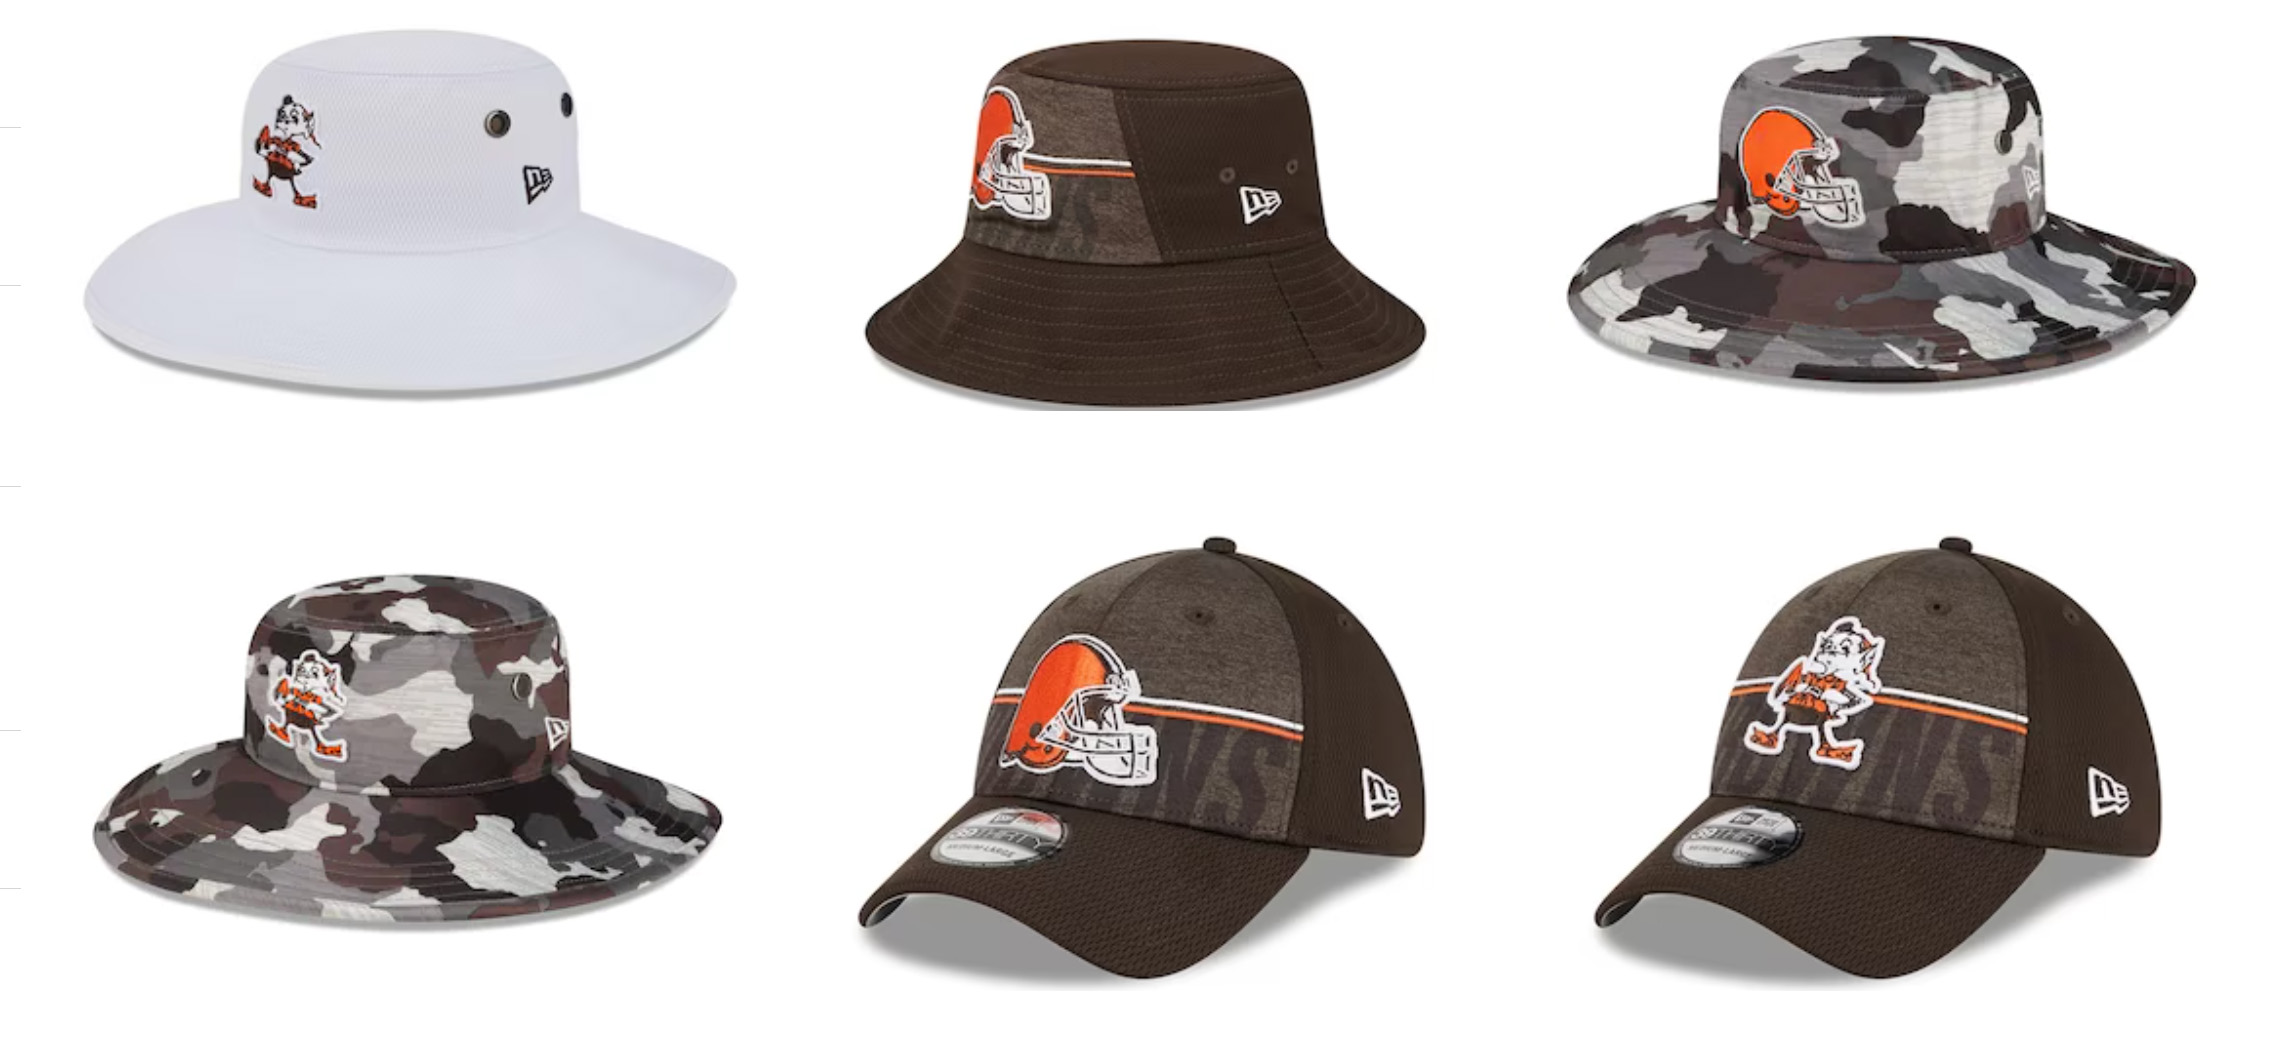 Gear up for training camp with the Browns New Era Summer Sideline